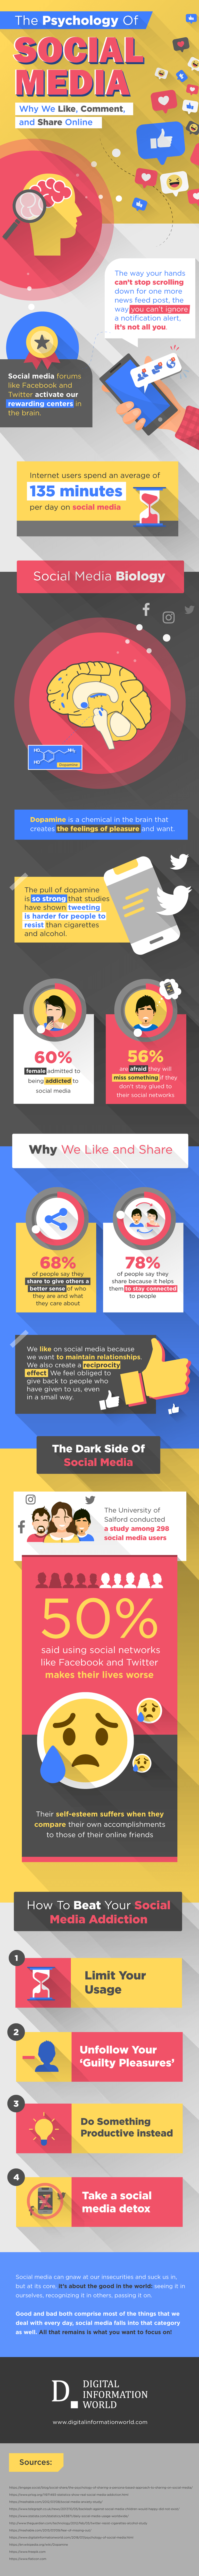 This infographic explains the extent to which people are addicted to social media, and the reasons behind this addiction.